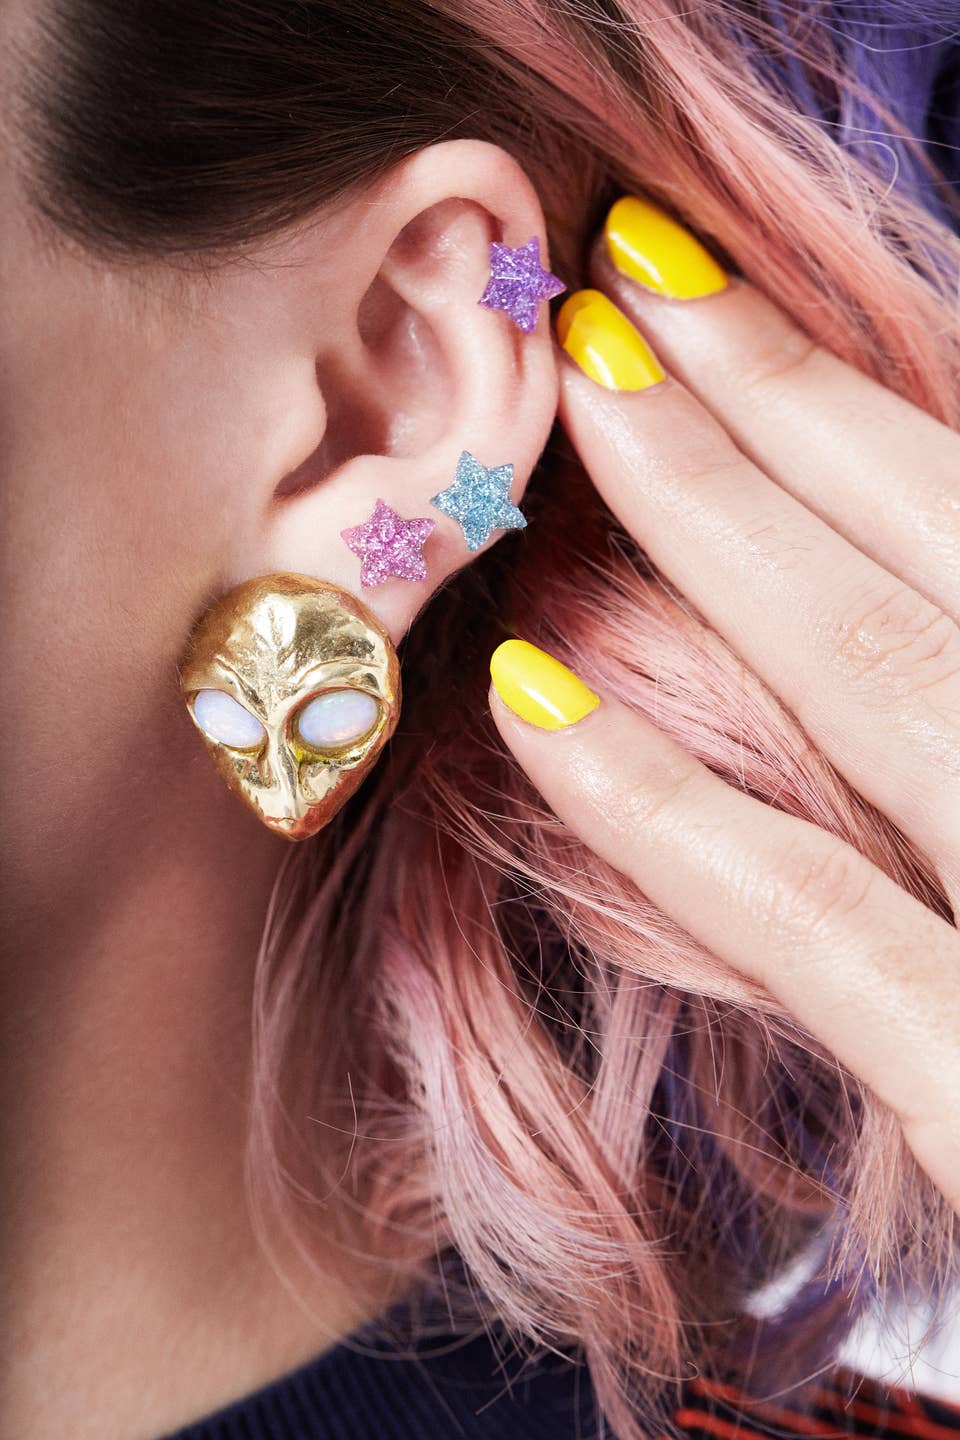 How To Treat Infected Ear Piercings, From Dermatologist